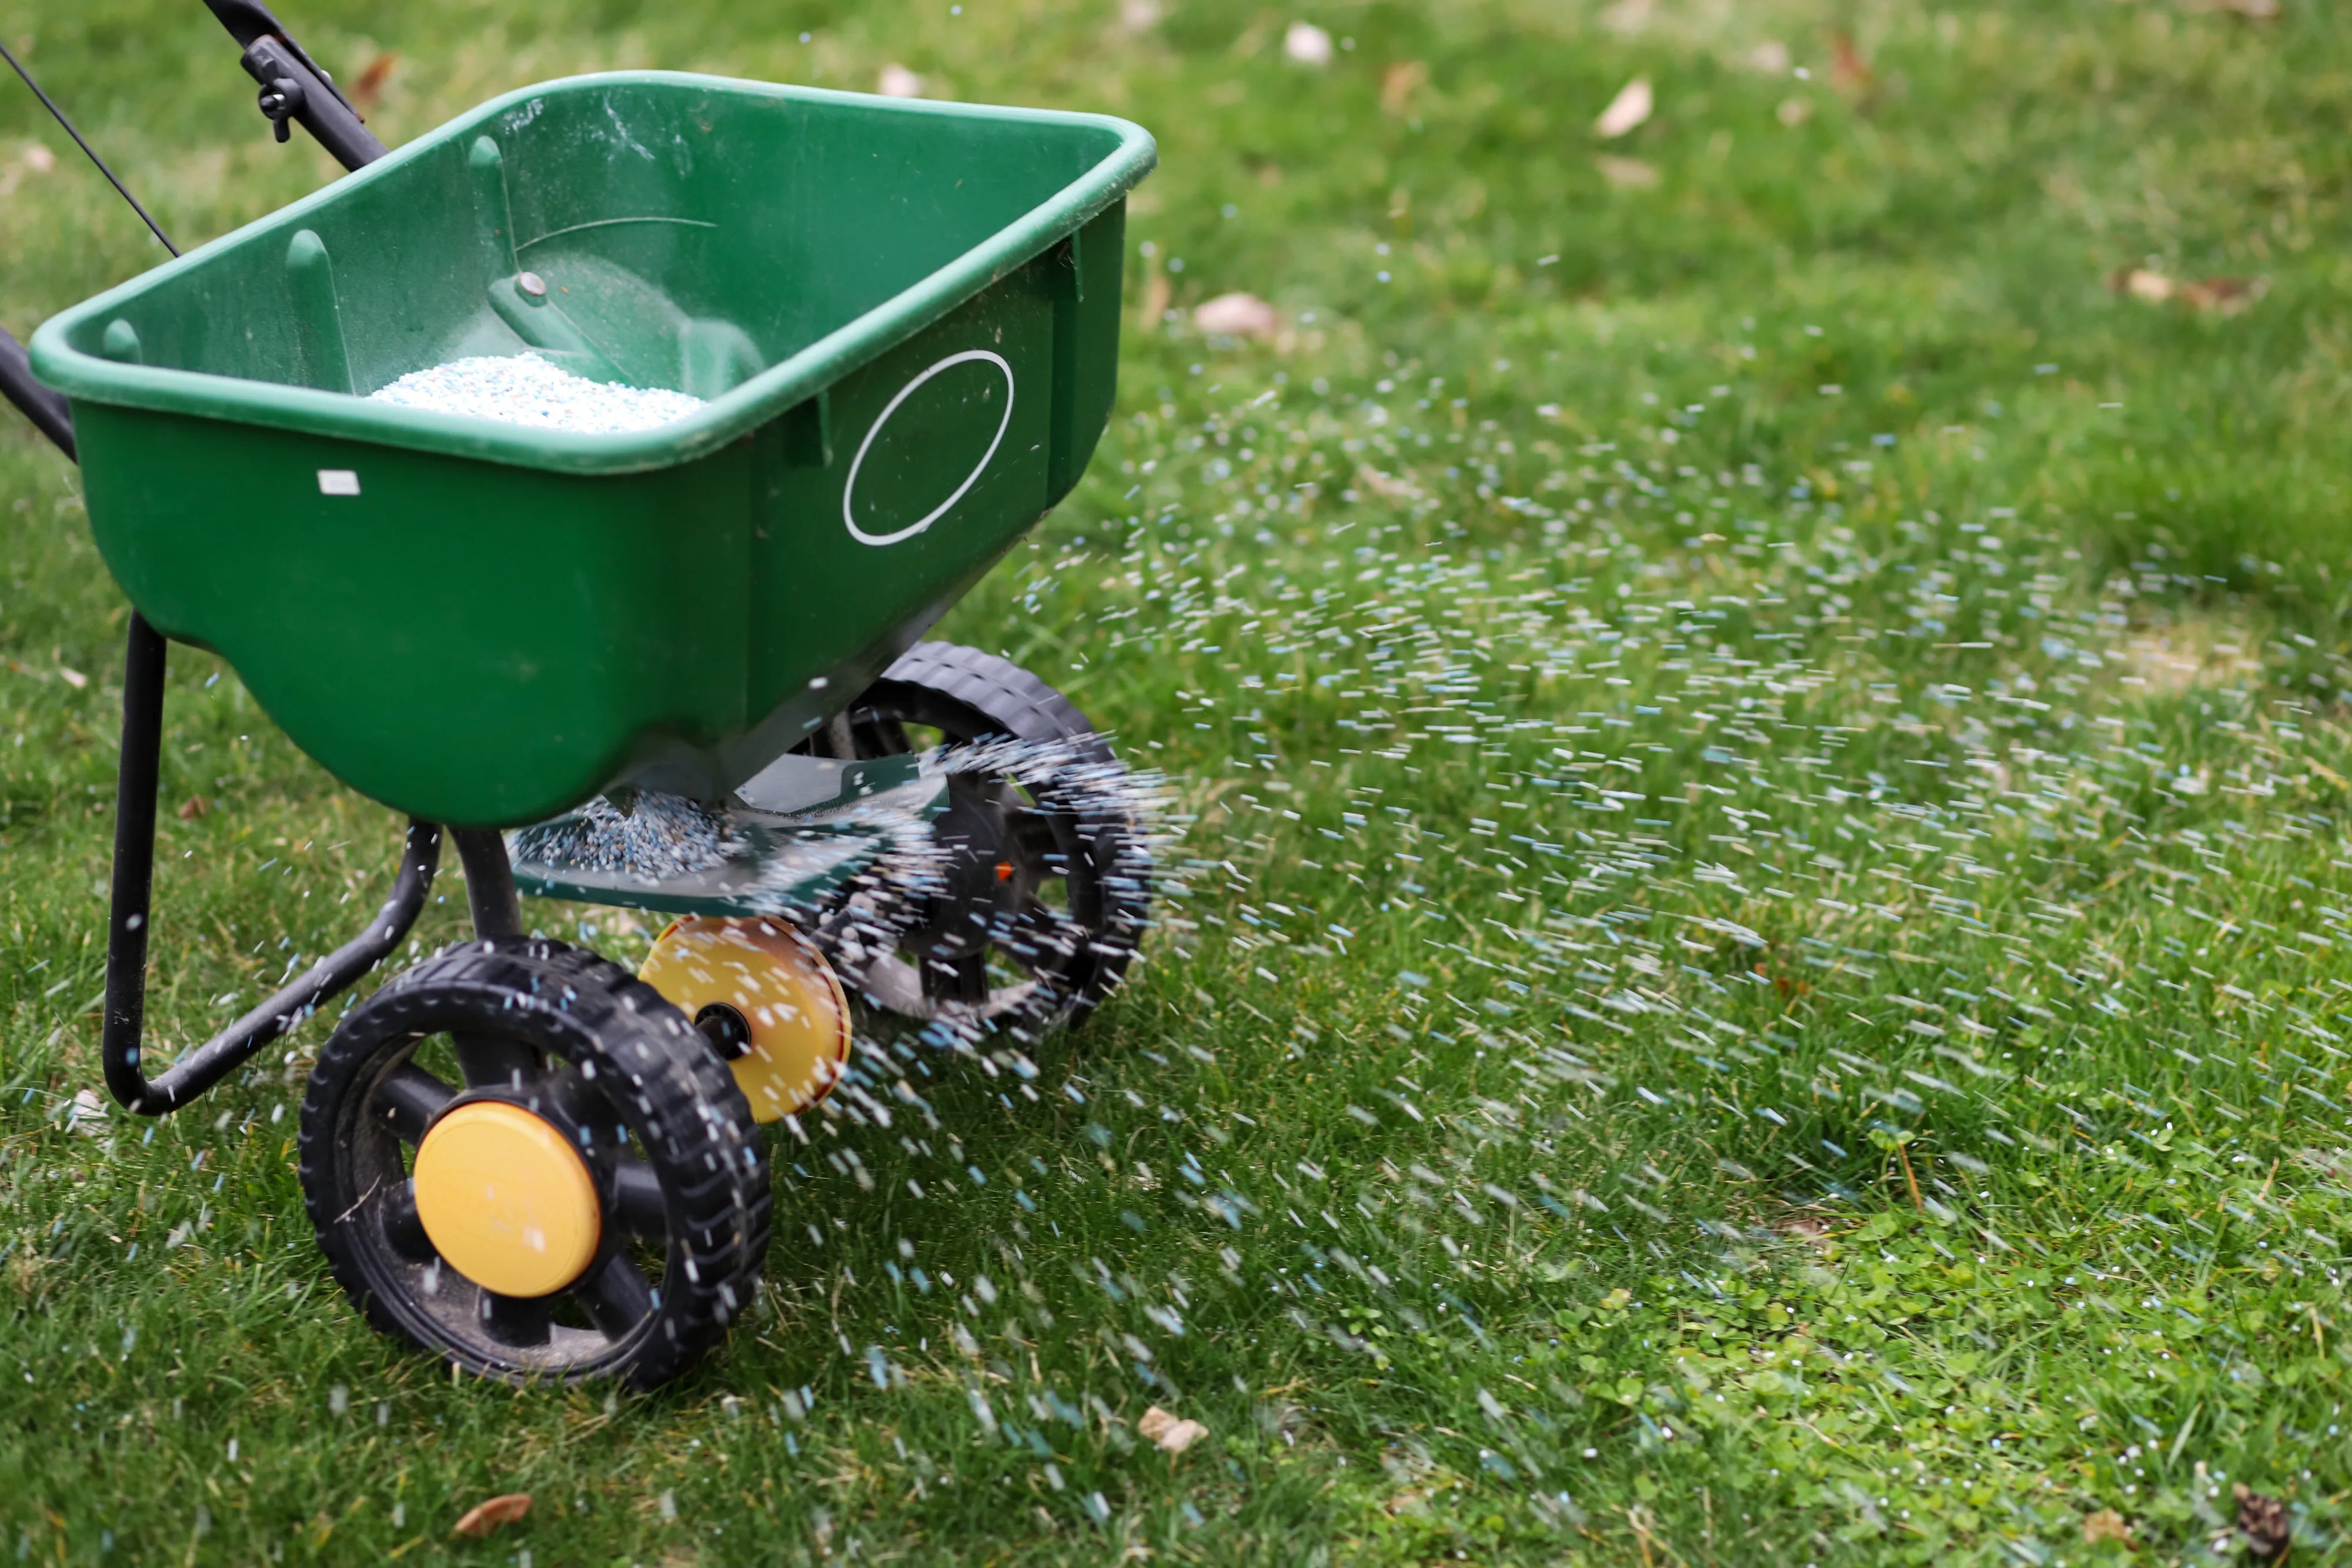 Additional Services Offered by a License Contractor that I will refer you to include · Fertilization, Weed Control, and Lawn Restoration as well as Irrigation Maintenance.

 for The Grass Guys Complete Lawn Care LLC. in Evansville, IN